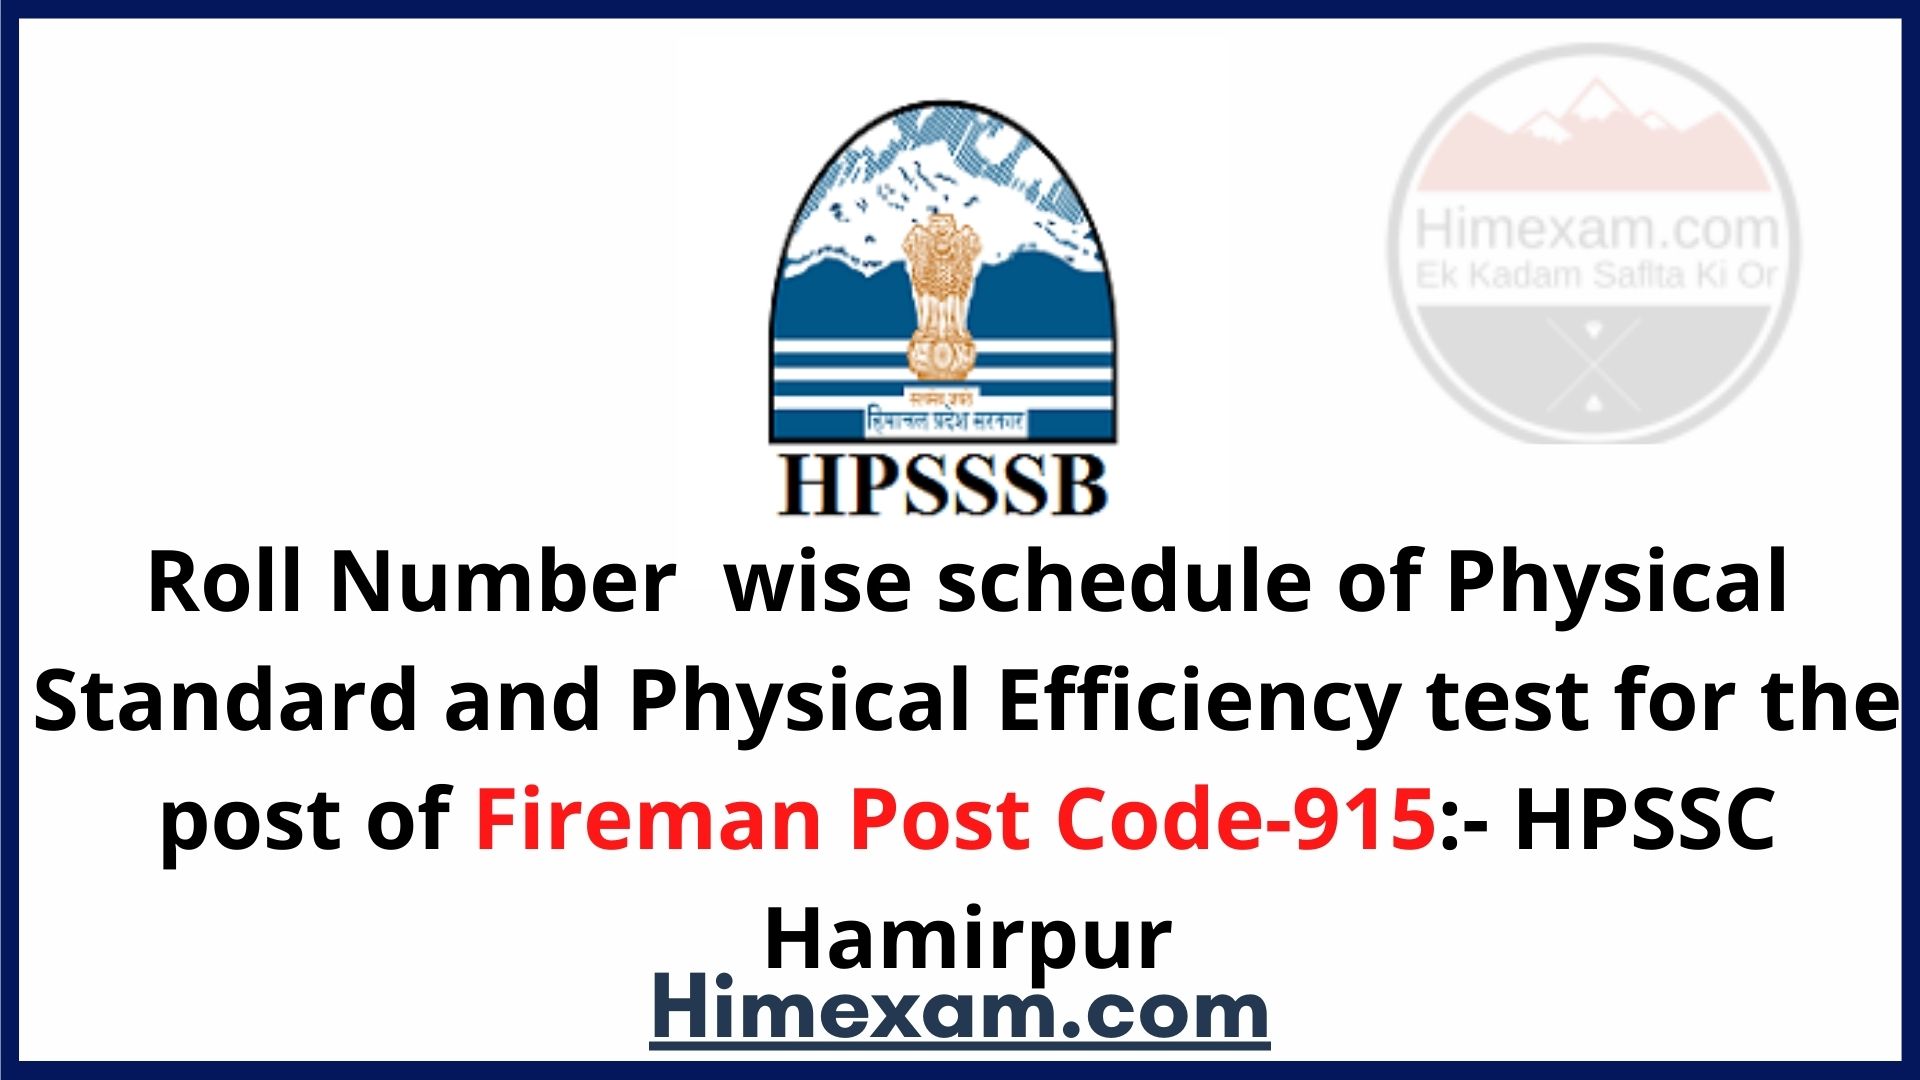 Roll Number  wise schedule of Physical Standard and Physical Efficiency test for the post of Fireman Post Code-915:- HPSSC Hamirpur